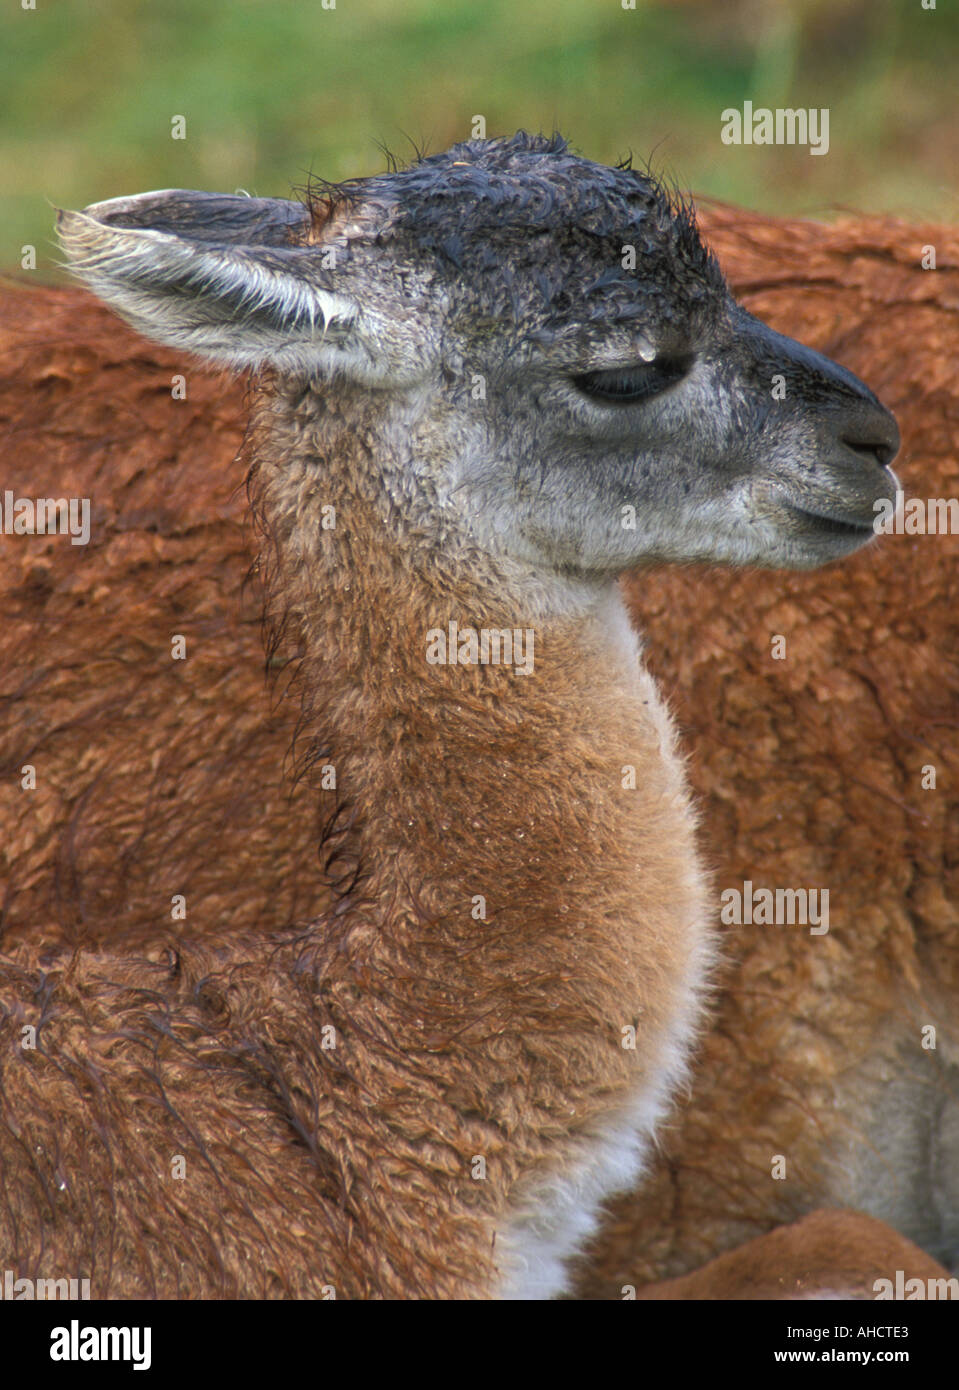 Young Guanaco  sitting at mothers side with rain drop on eyelid Stock Photo